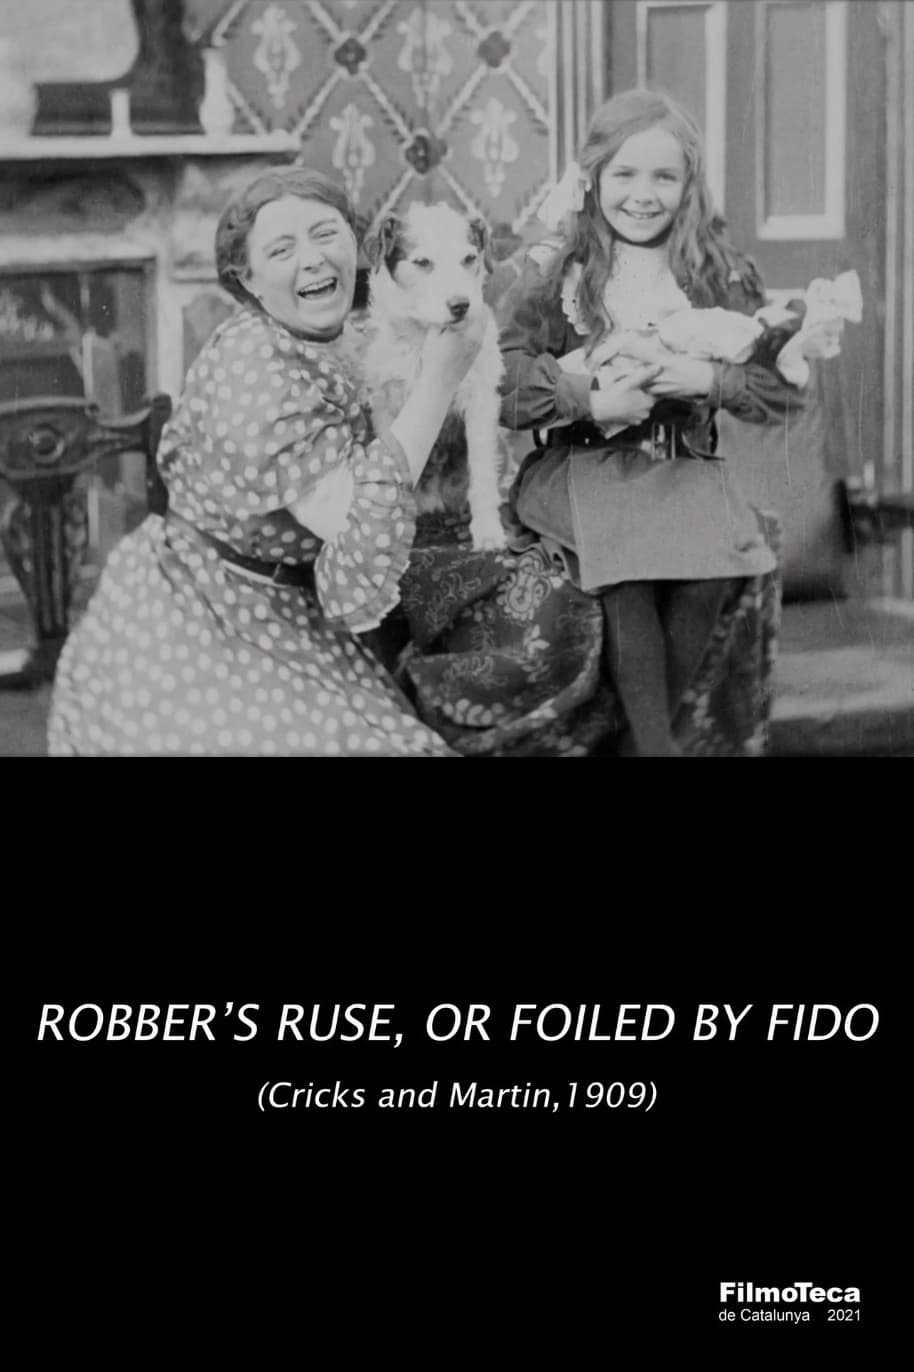 The Robber's Ruse, or Foiled by Fido